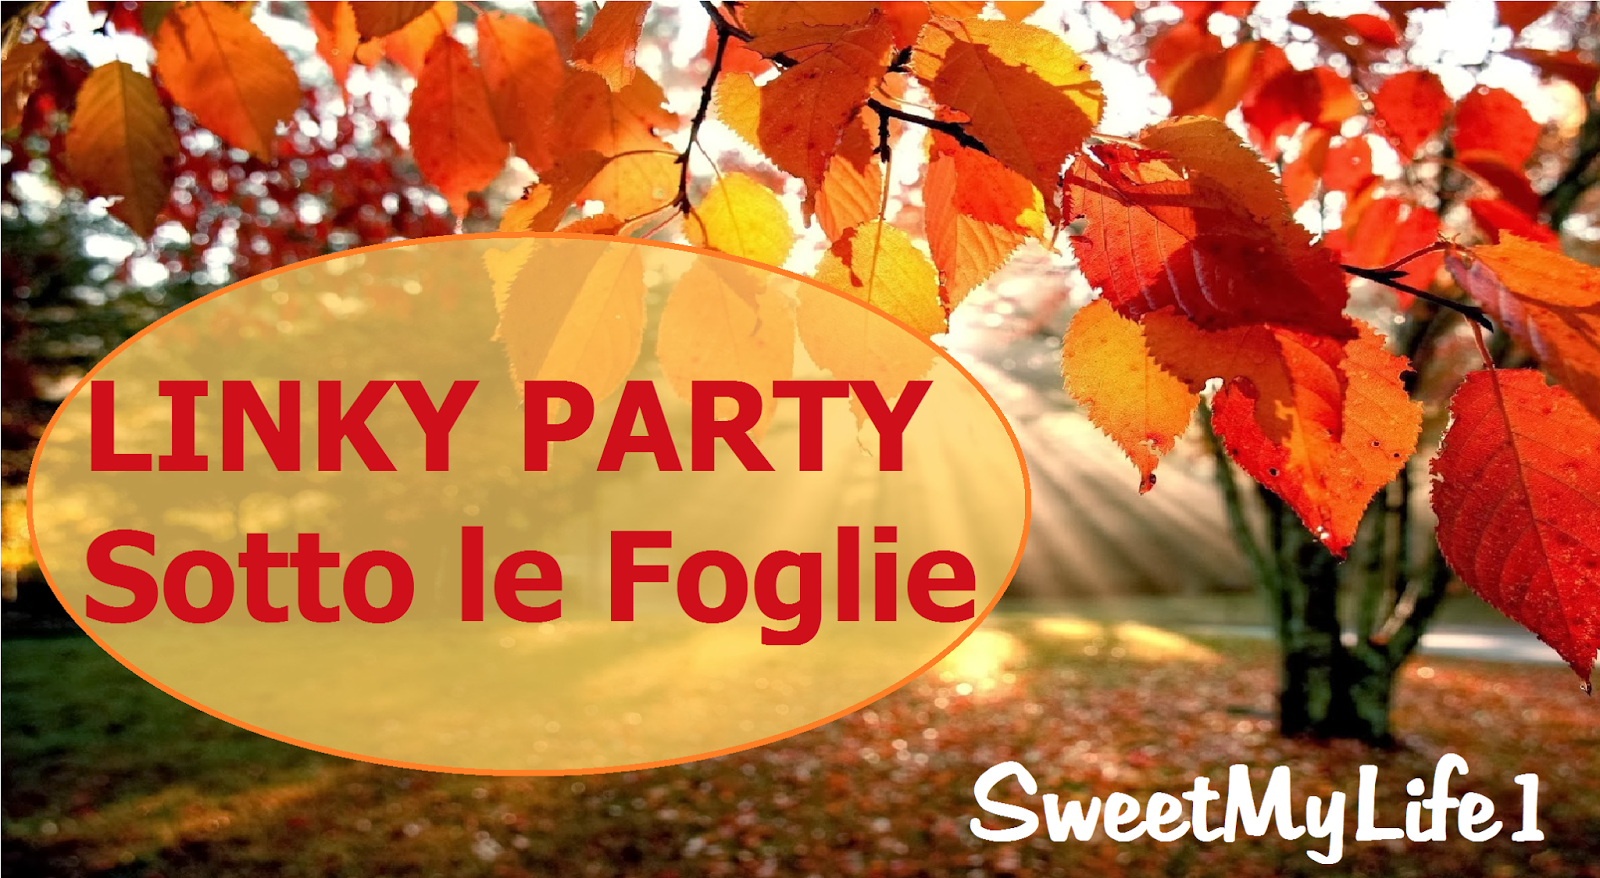 http://sweetmylife1.blogspot.it/2014/10/linky-party-sotto-le-foglie-aperto-tutti.html